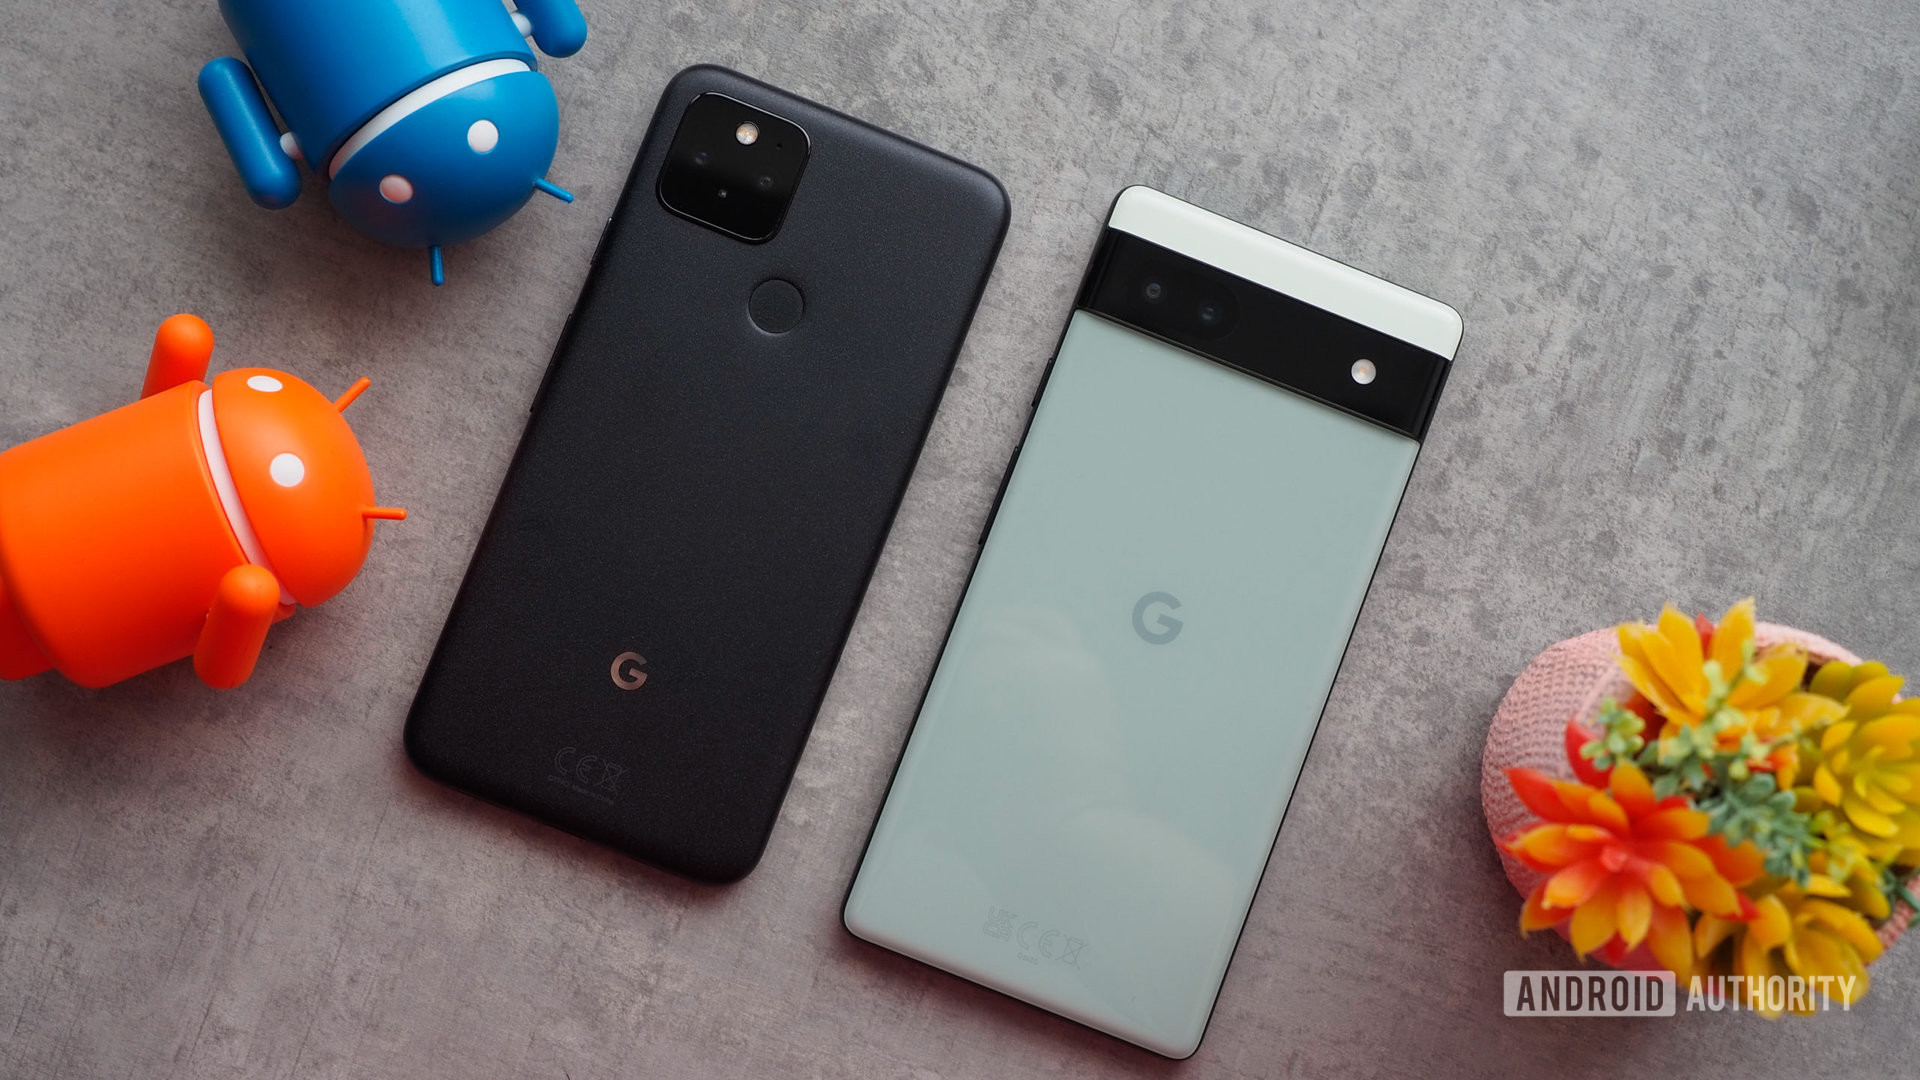 Google Pixel 5 next to Google Pixel 6a, seen from the back, tilted shot